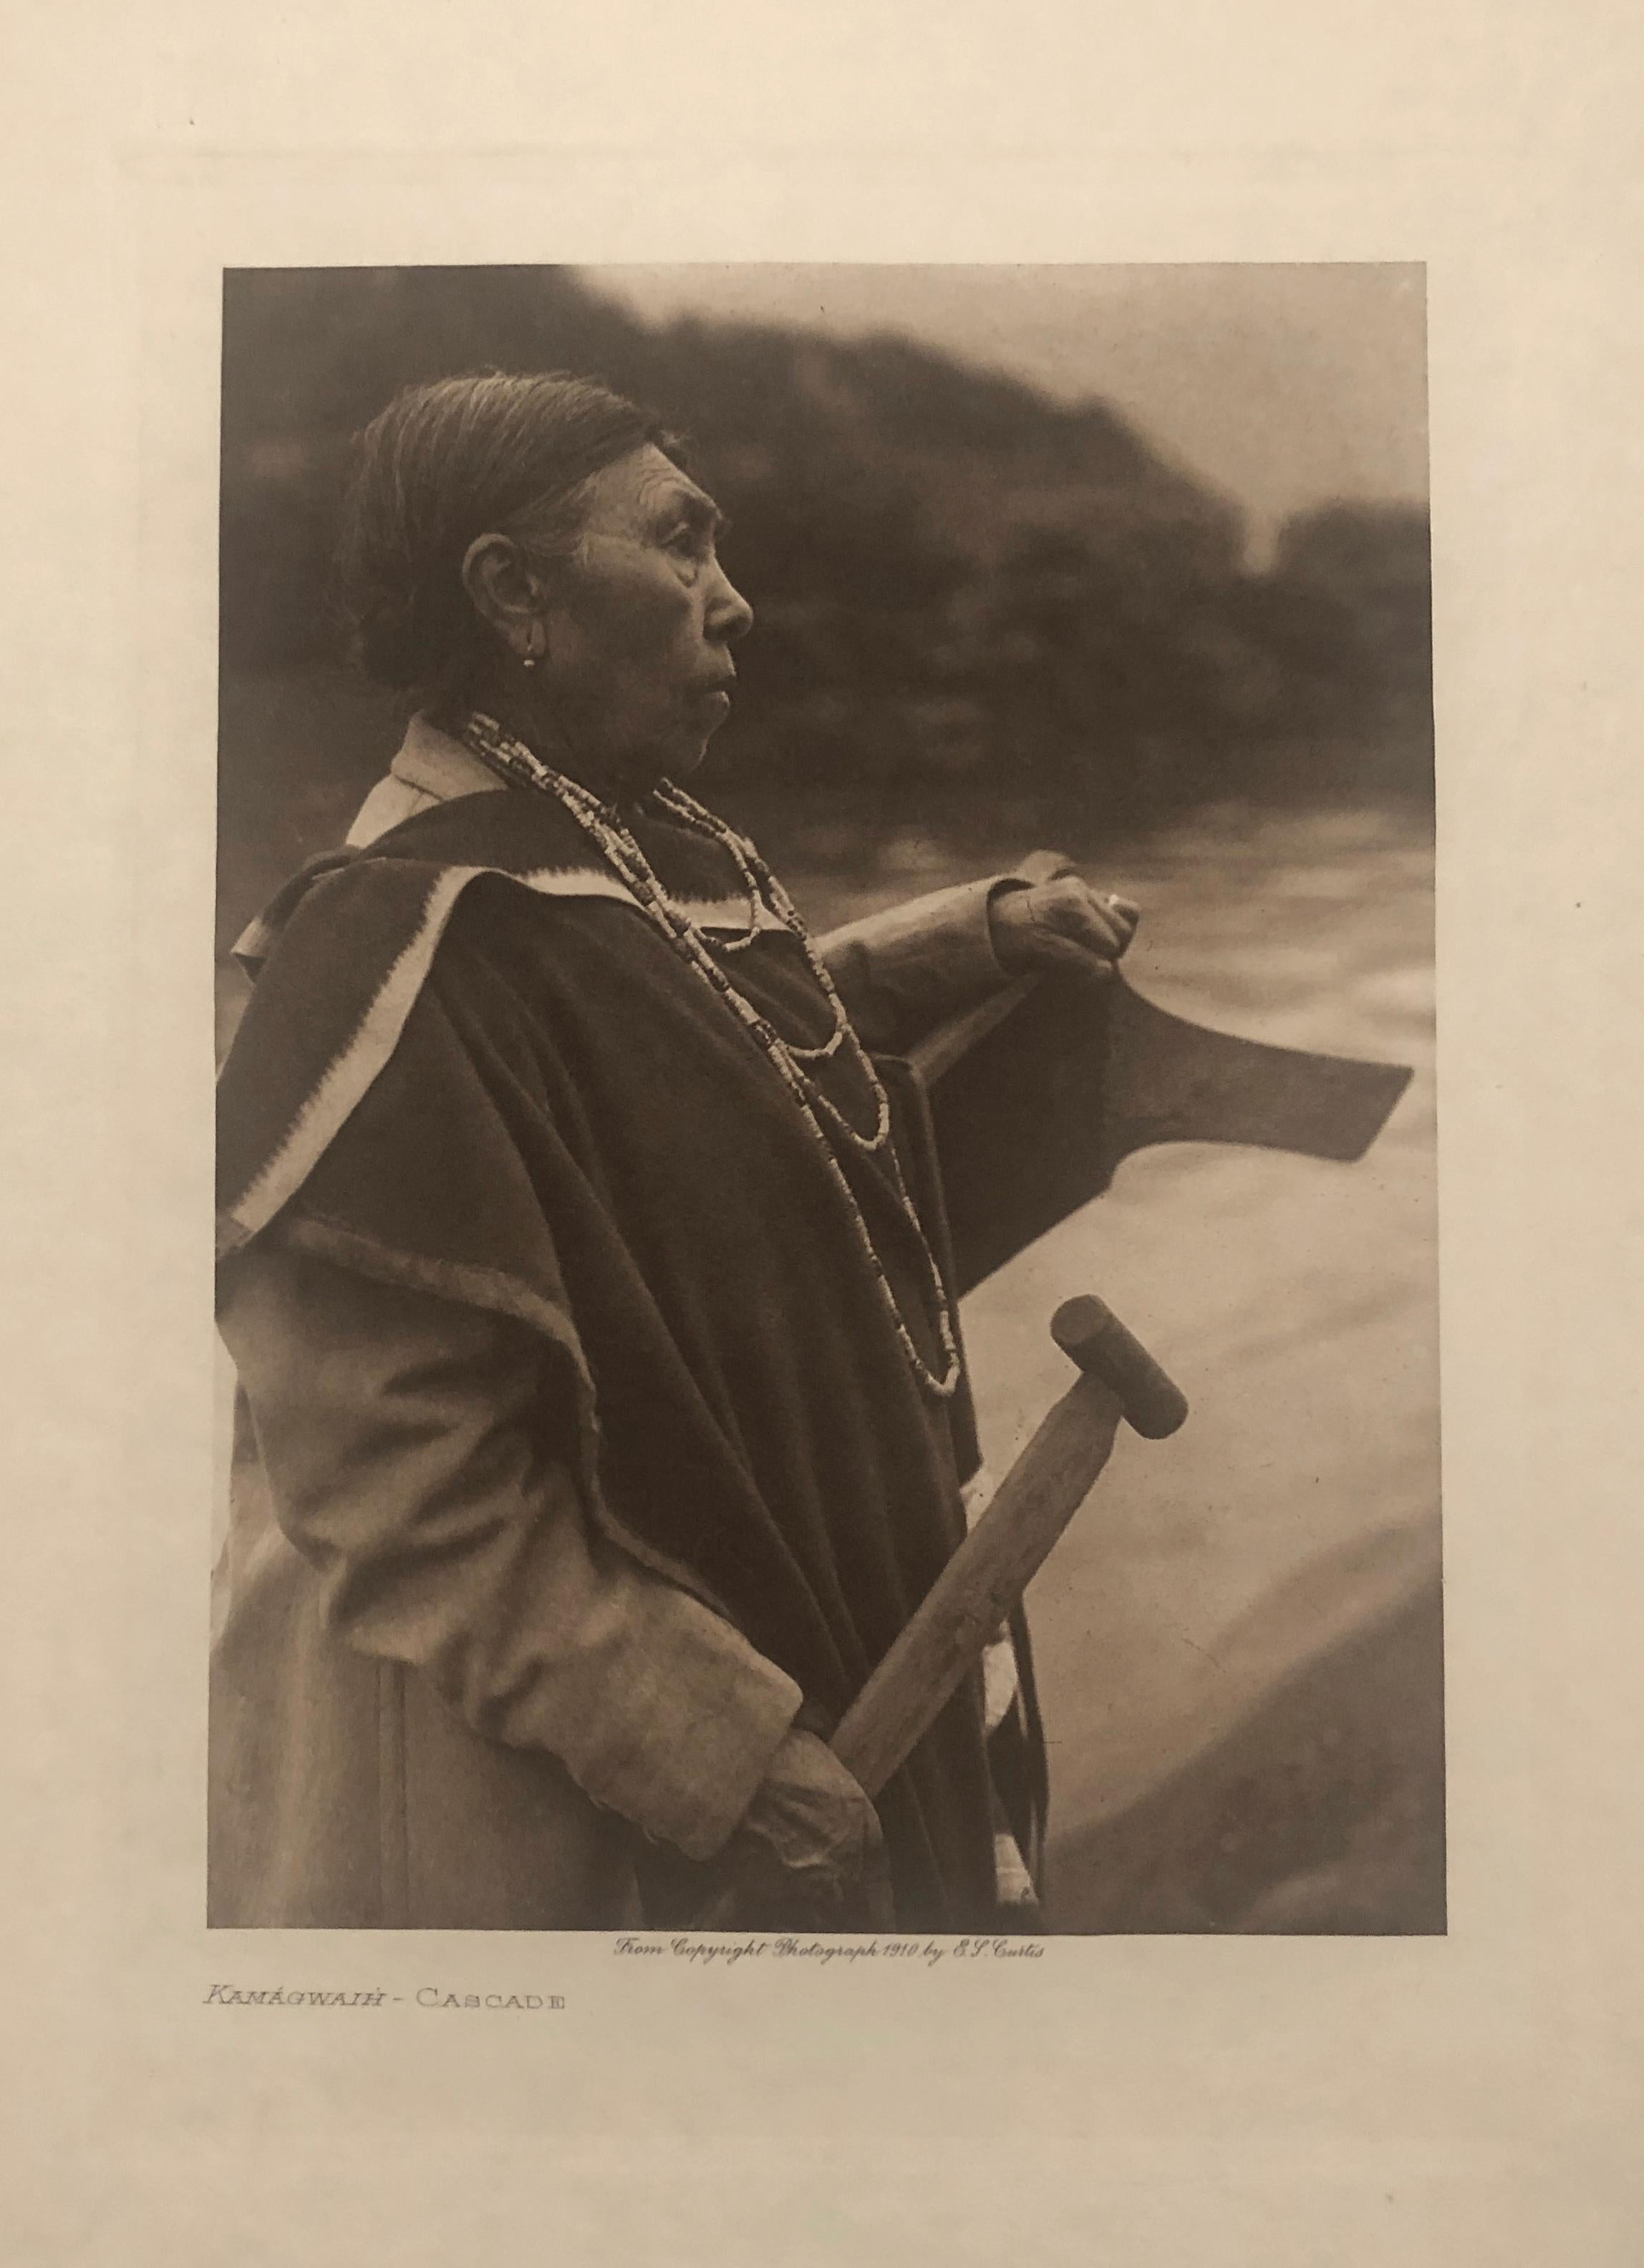 Edward Curtis, Kamagwaih Cascade, 1910, copper plate and matching photogravure For Sale 1